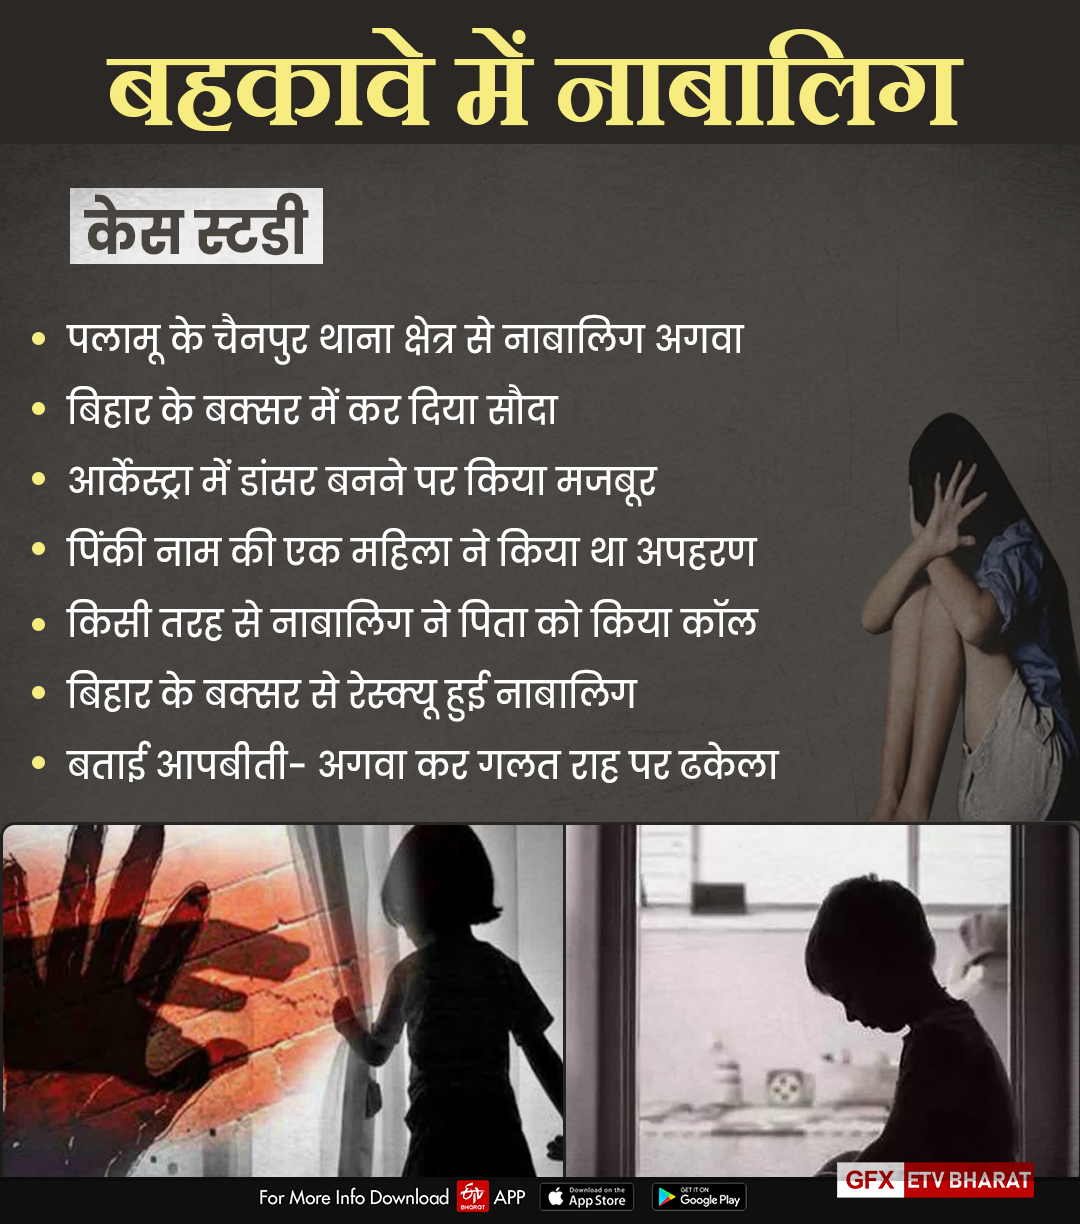 Minor girls becoming victims of pimps and human traffickers in Palamu